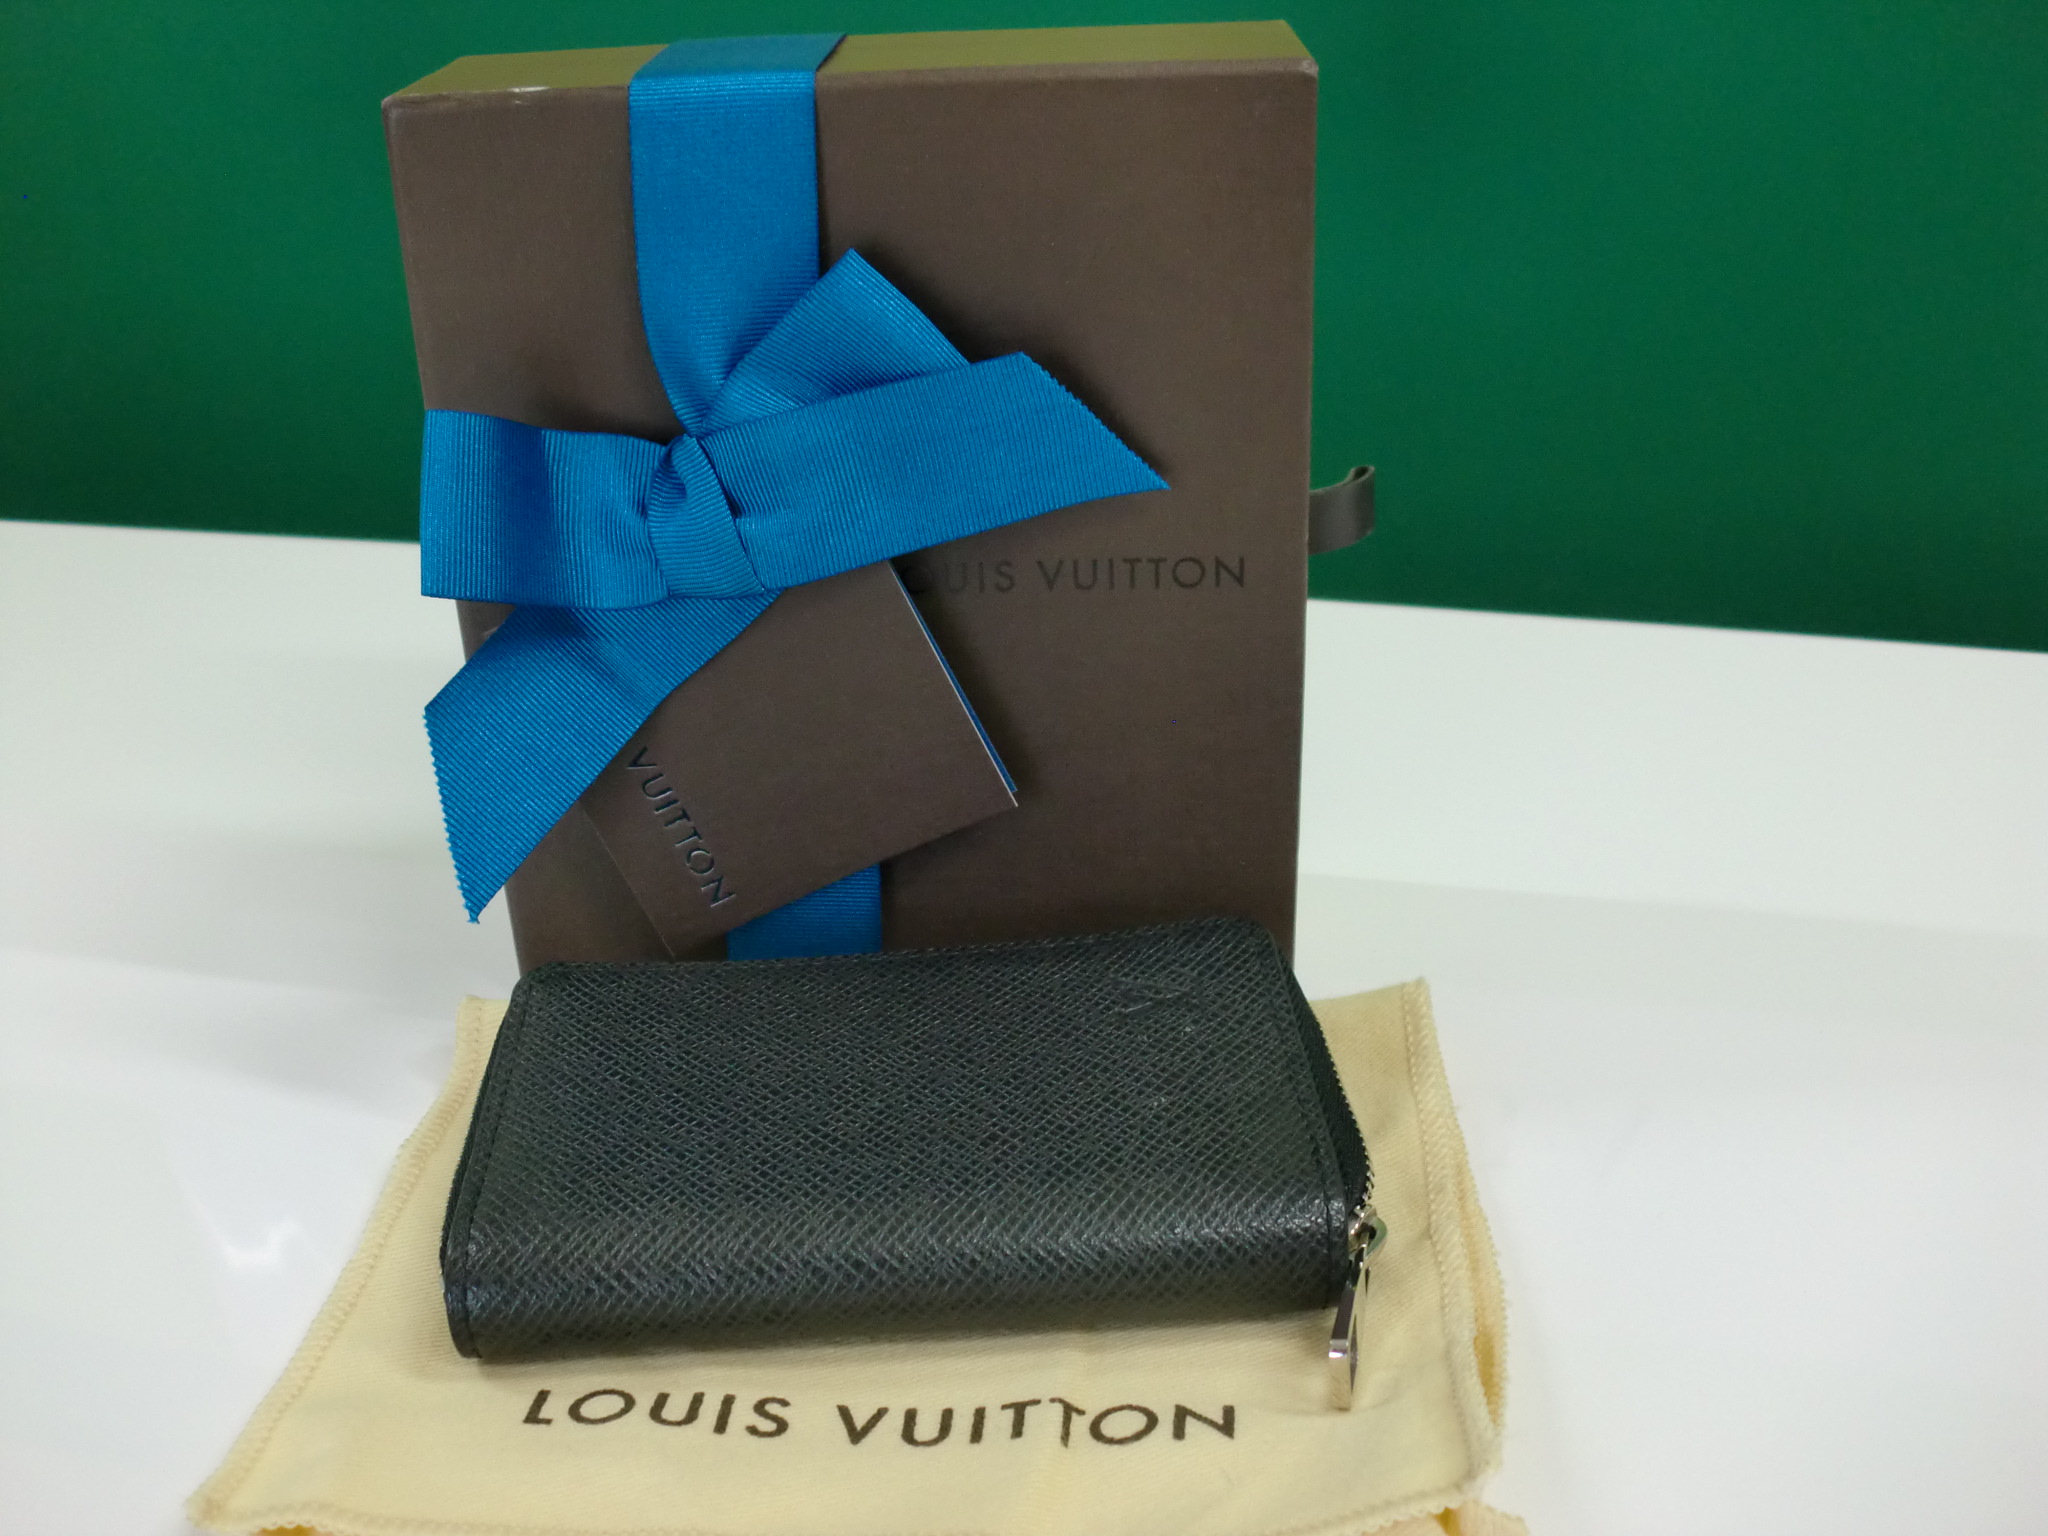 LOUIS VUITTON ルイヴィトン タイガ ジッピー コインケース  M30511